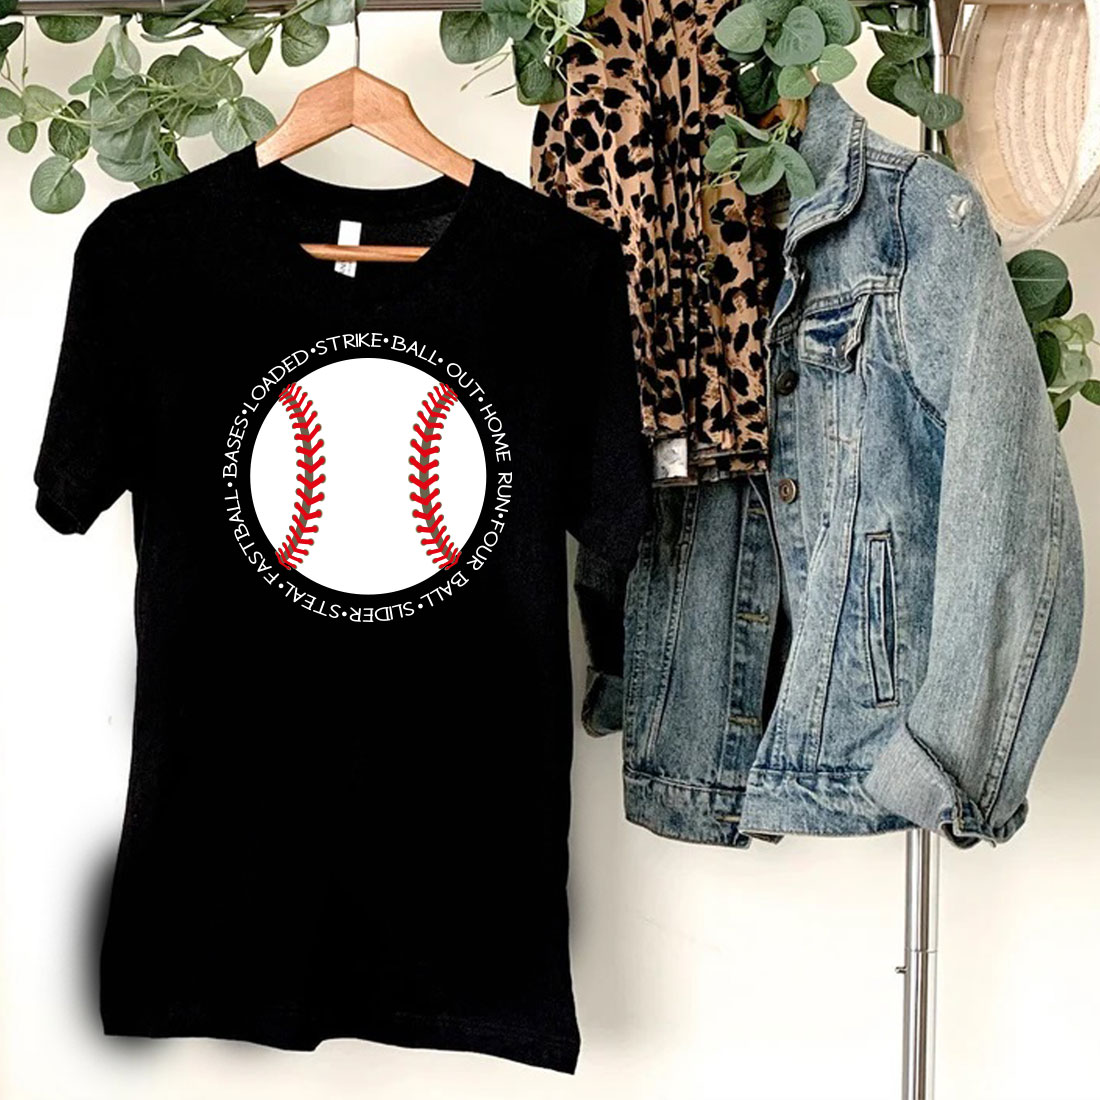 Black shirt with a baseball on it and a leopard print scarf hanging on a.